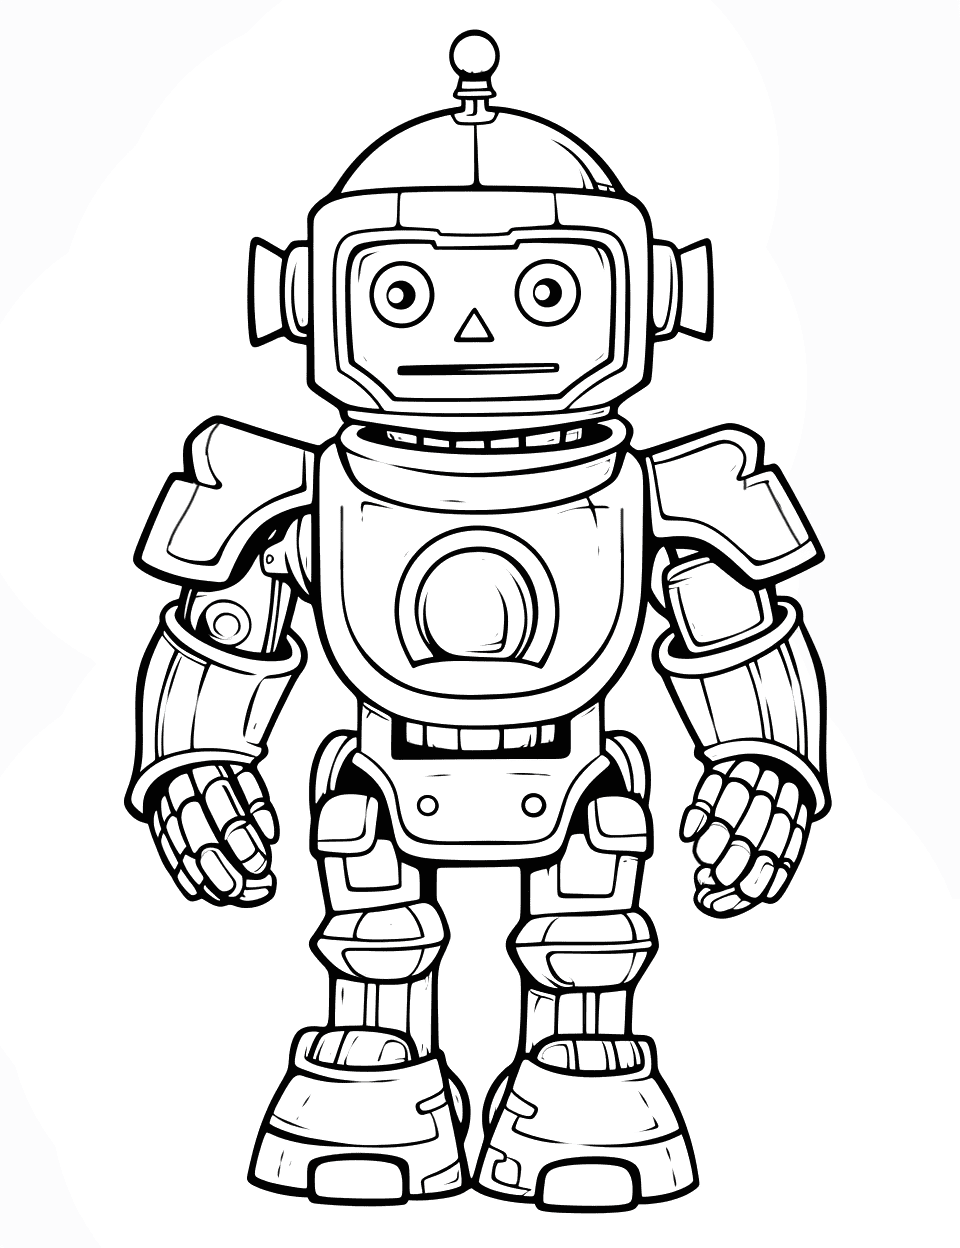 Medieval Robot Knight Coloring Page - A medieval-themed robot in knight armor.